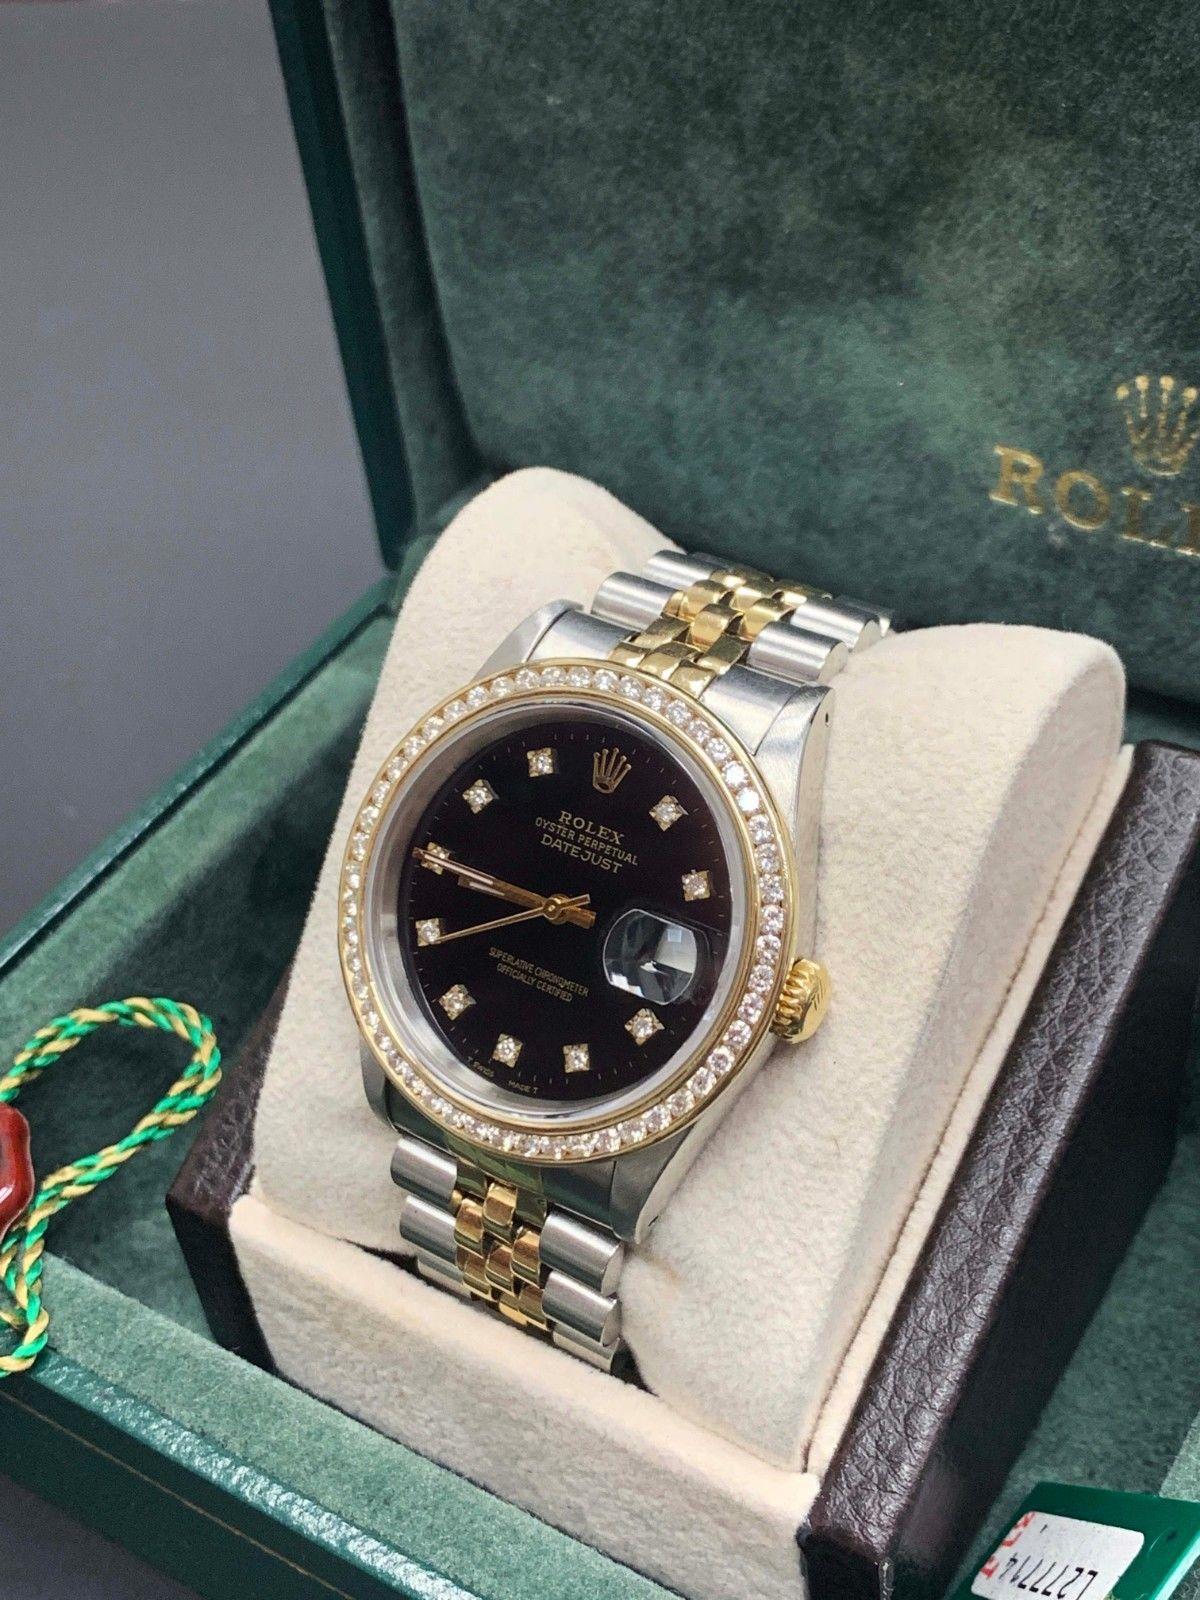 Style Number: 16233 
Serial: L277***
Model: Datejust 
Case Material: Stainless Steel
Band: 18K Yellow Gold & Stainless Steel 
Bezel: Custom Diamond Bezel 
Dial: Custom Diamond Dial 
Face: Sapphire Crystal 
Case Size: 36mm
Includes: 
-Rolex Box &